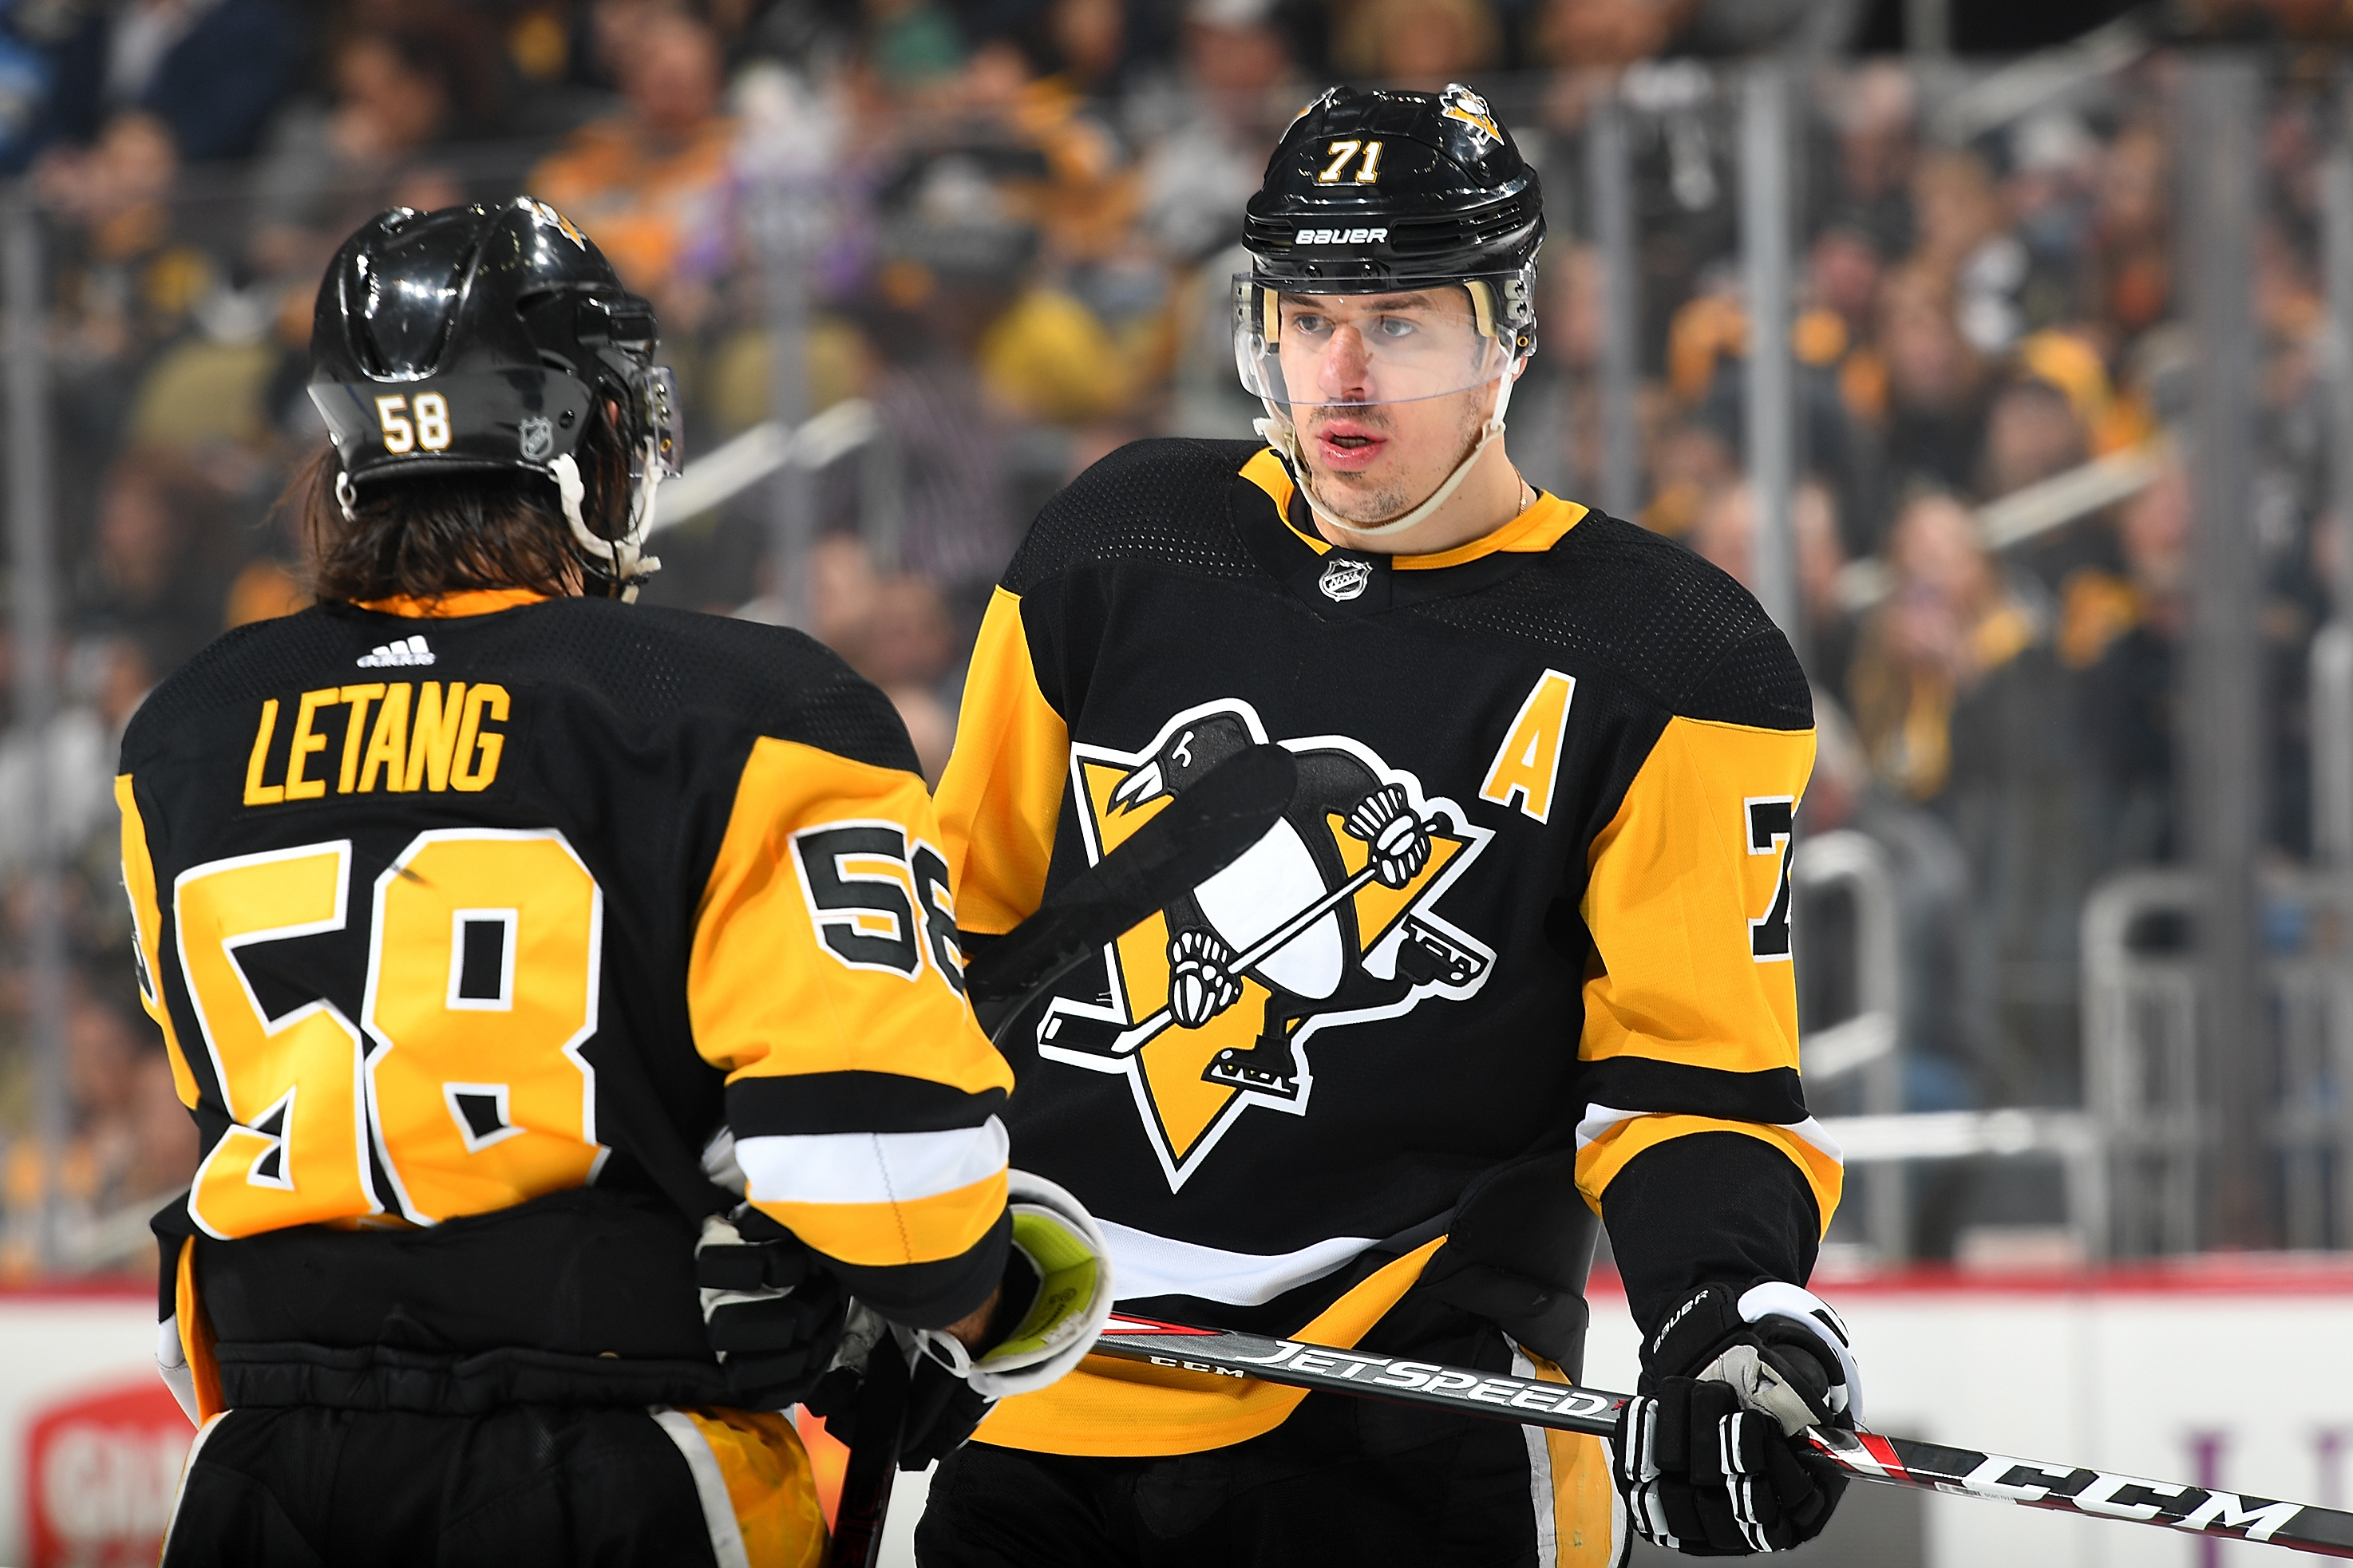 Runway Getting Shorter': Penguins Core Feels Pressure of Time, Opportunity